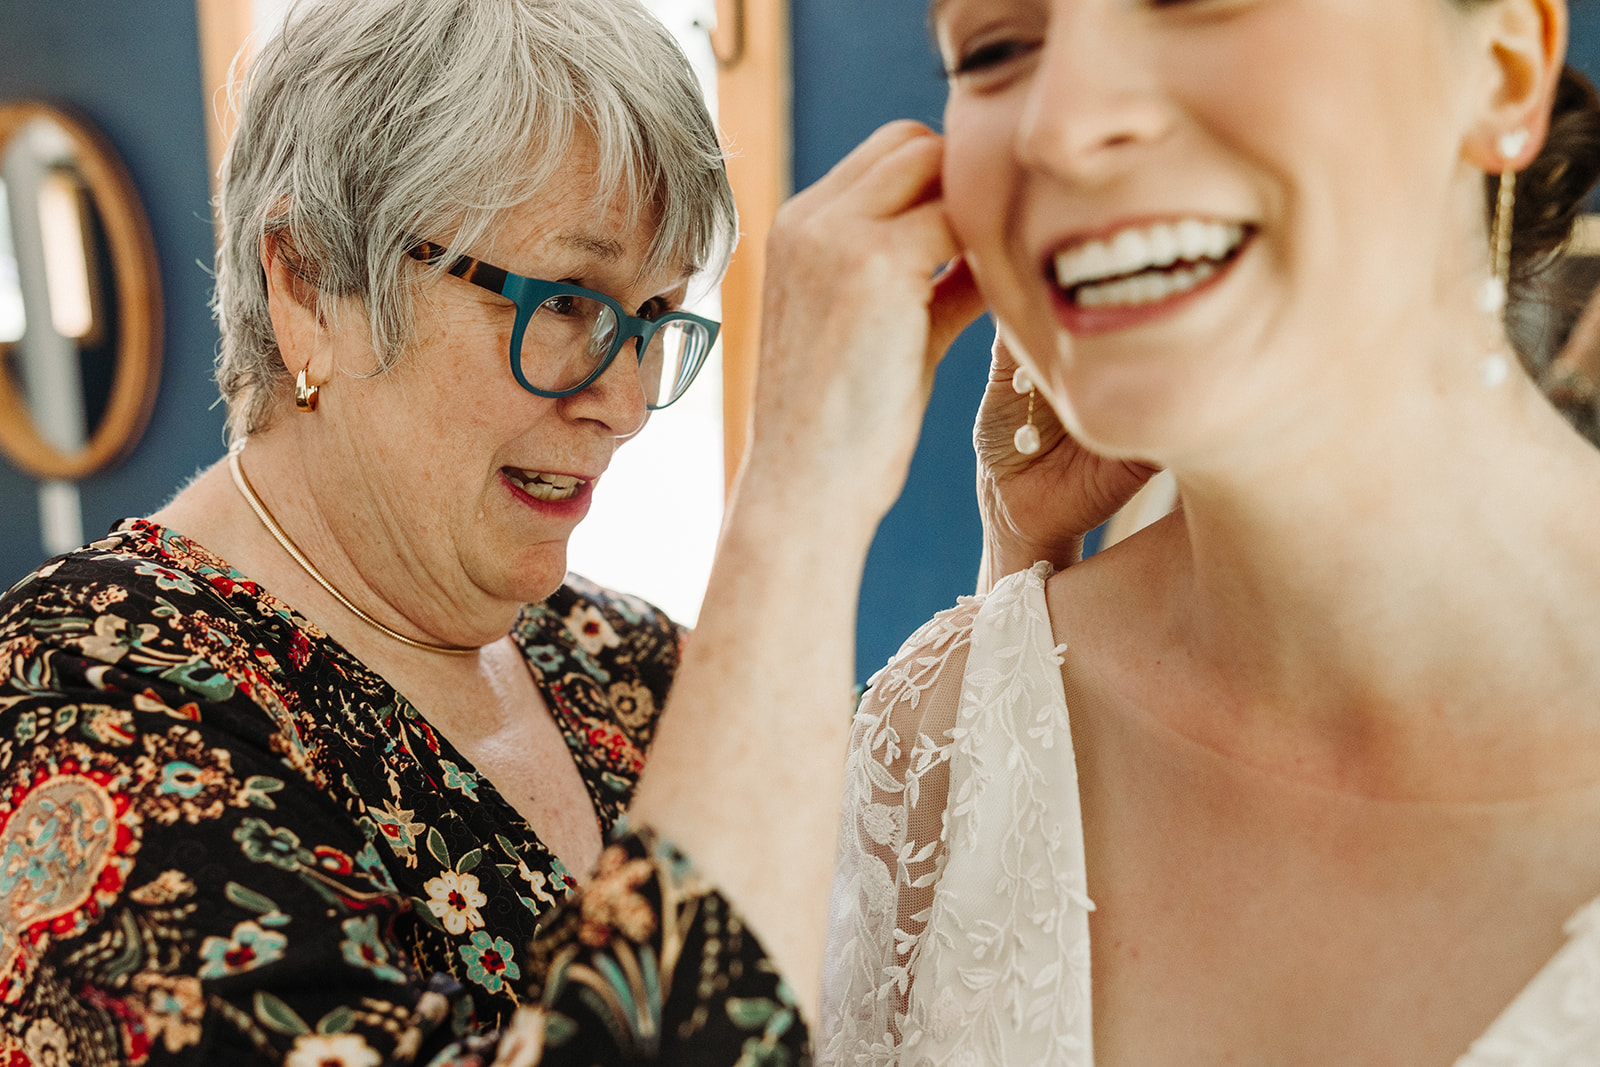 The mother of the bride puts on her daughter's dangly earrings as the bride smiles brightly.